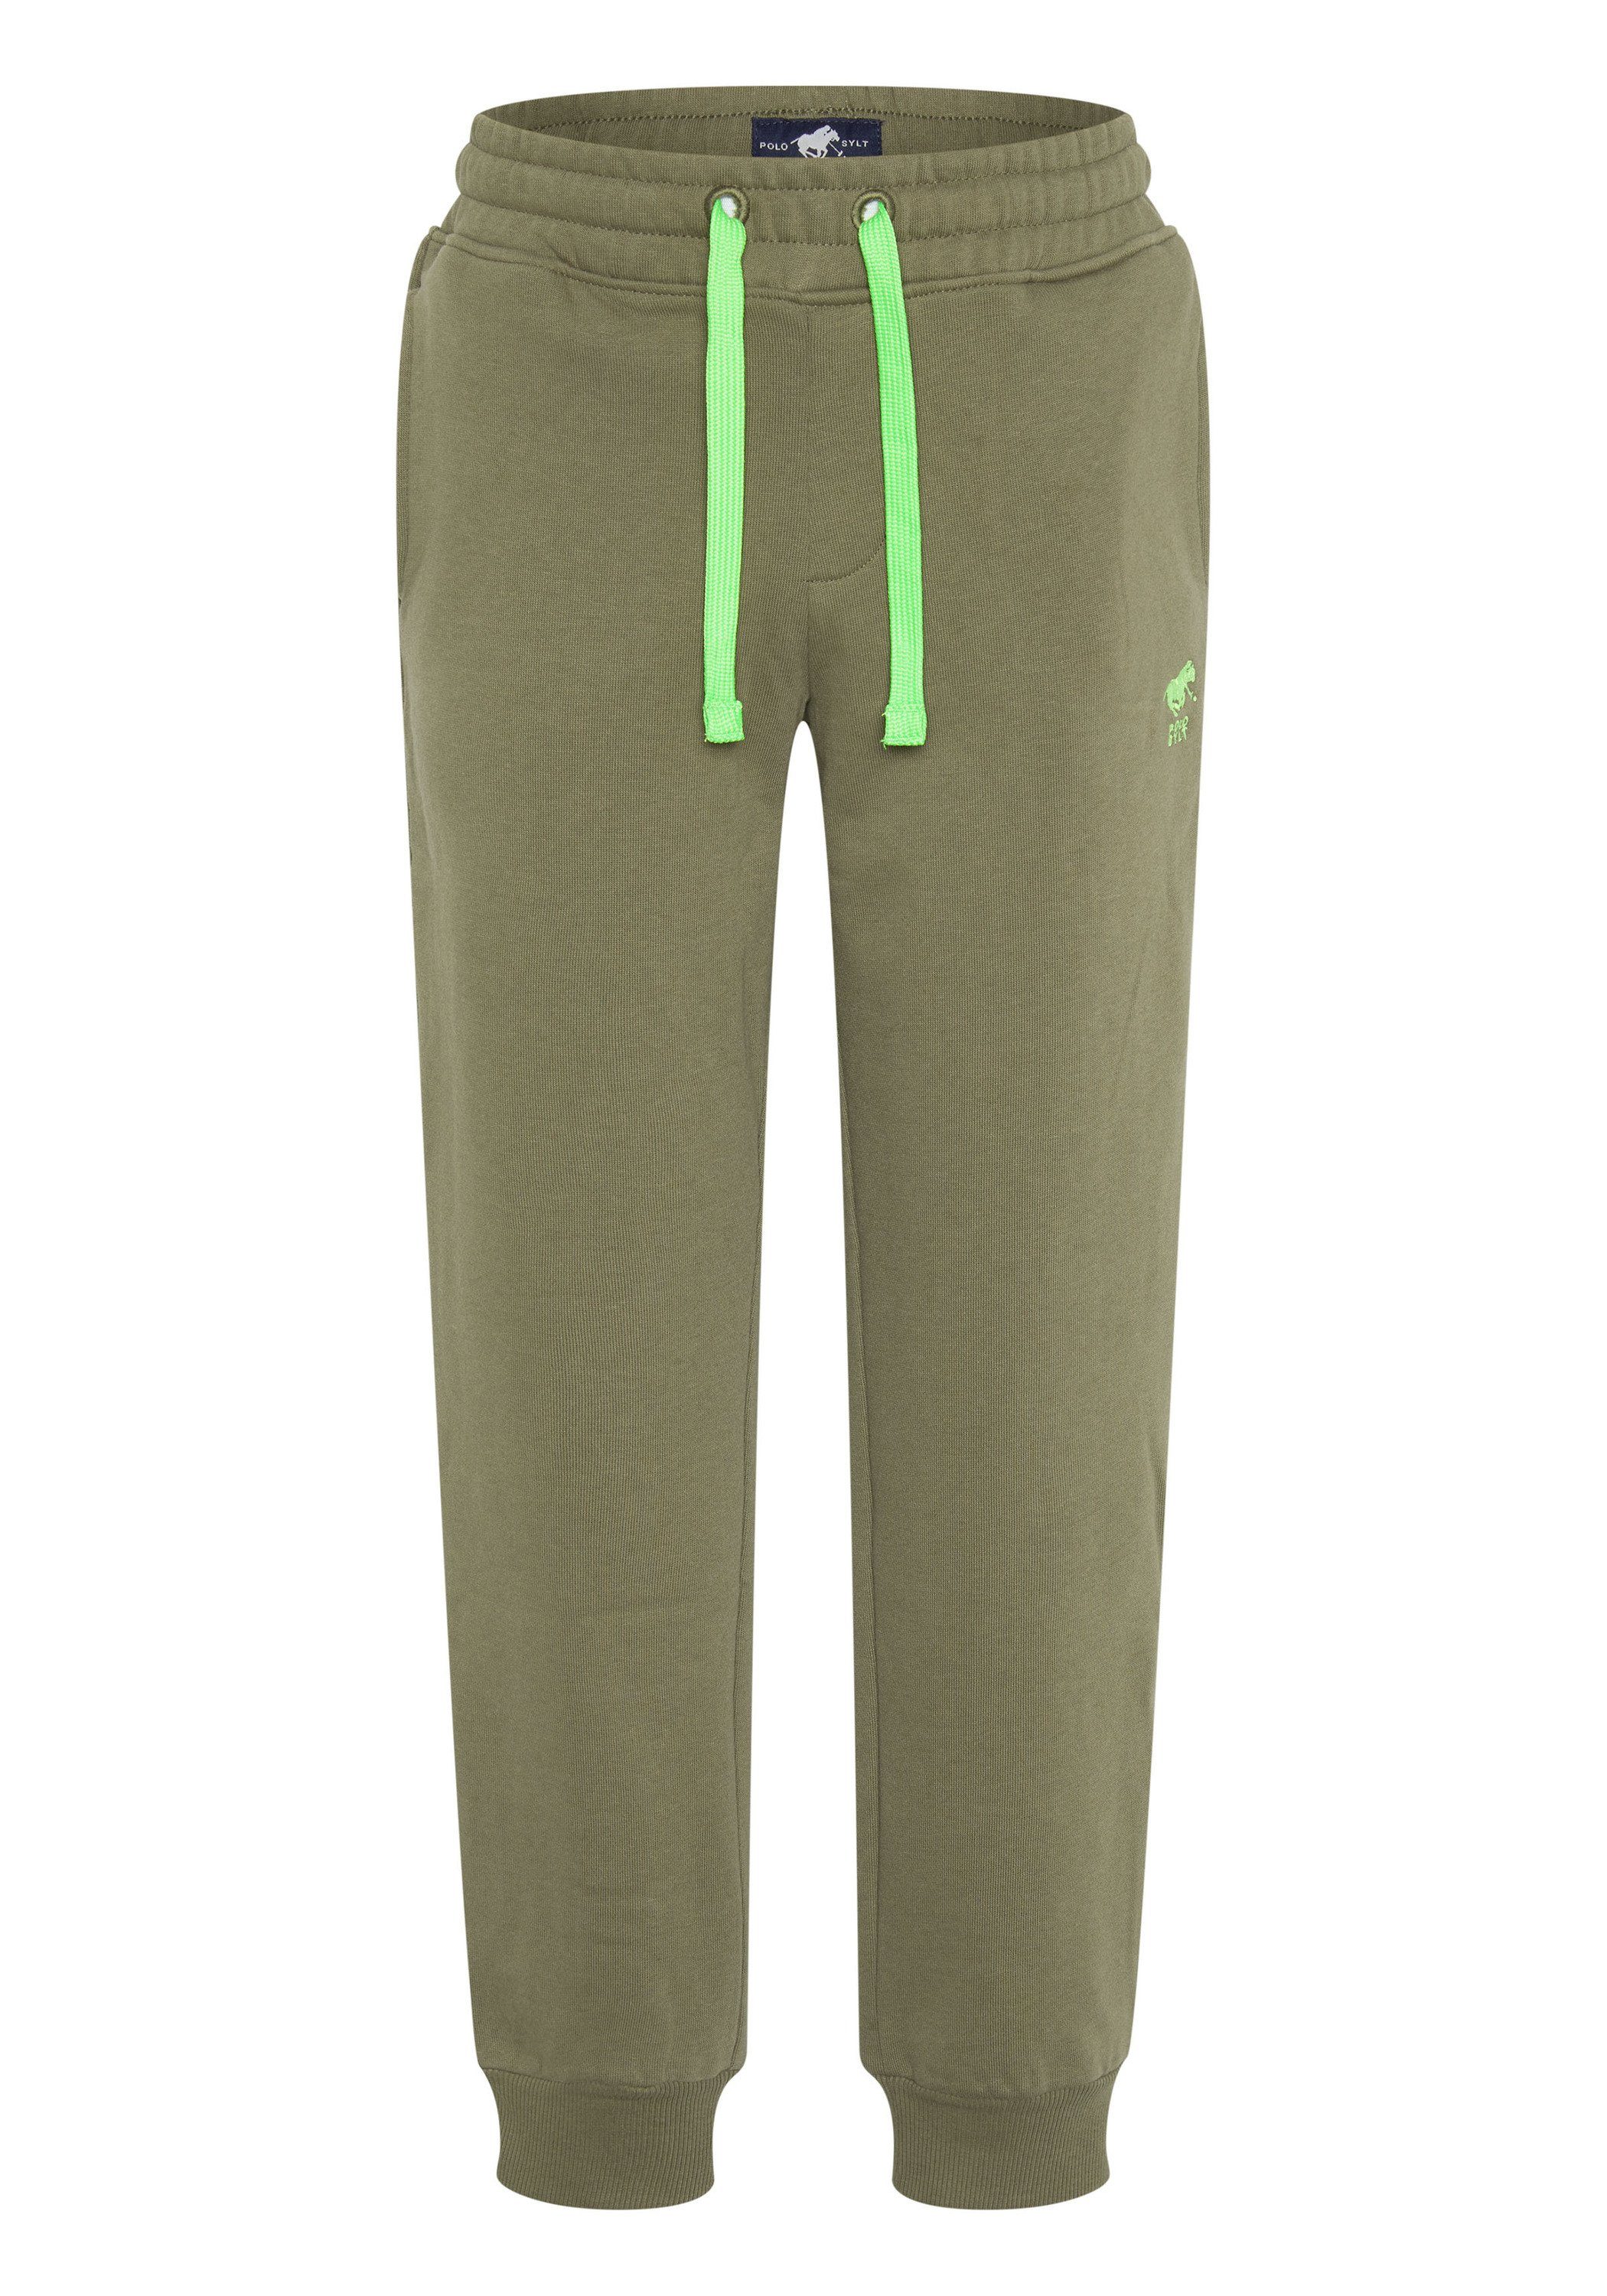 Two-Tone-Look Burnt im 18-0521 Polo Jogginghose Sylt Olive